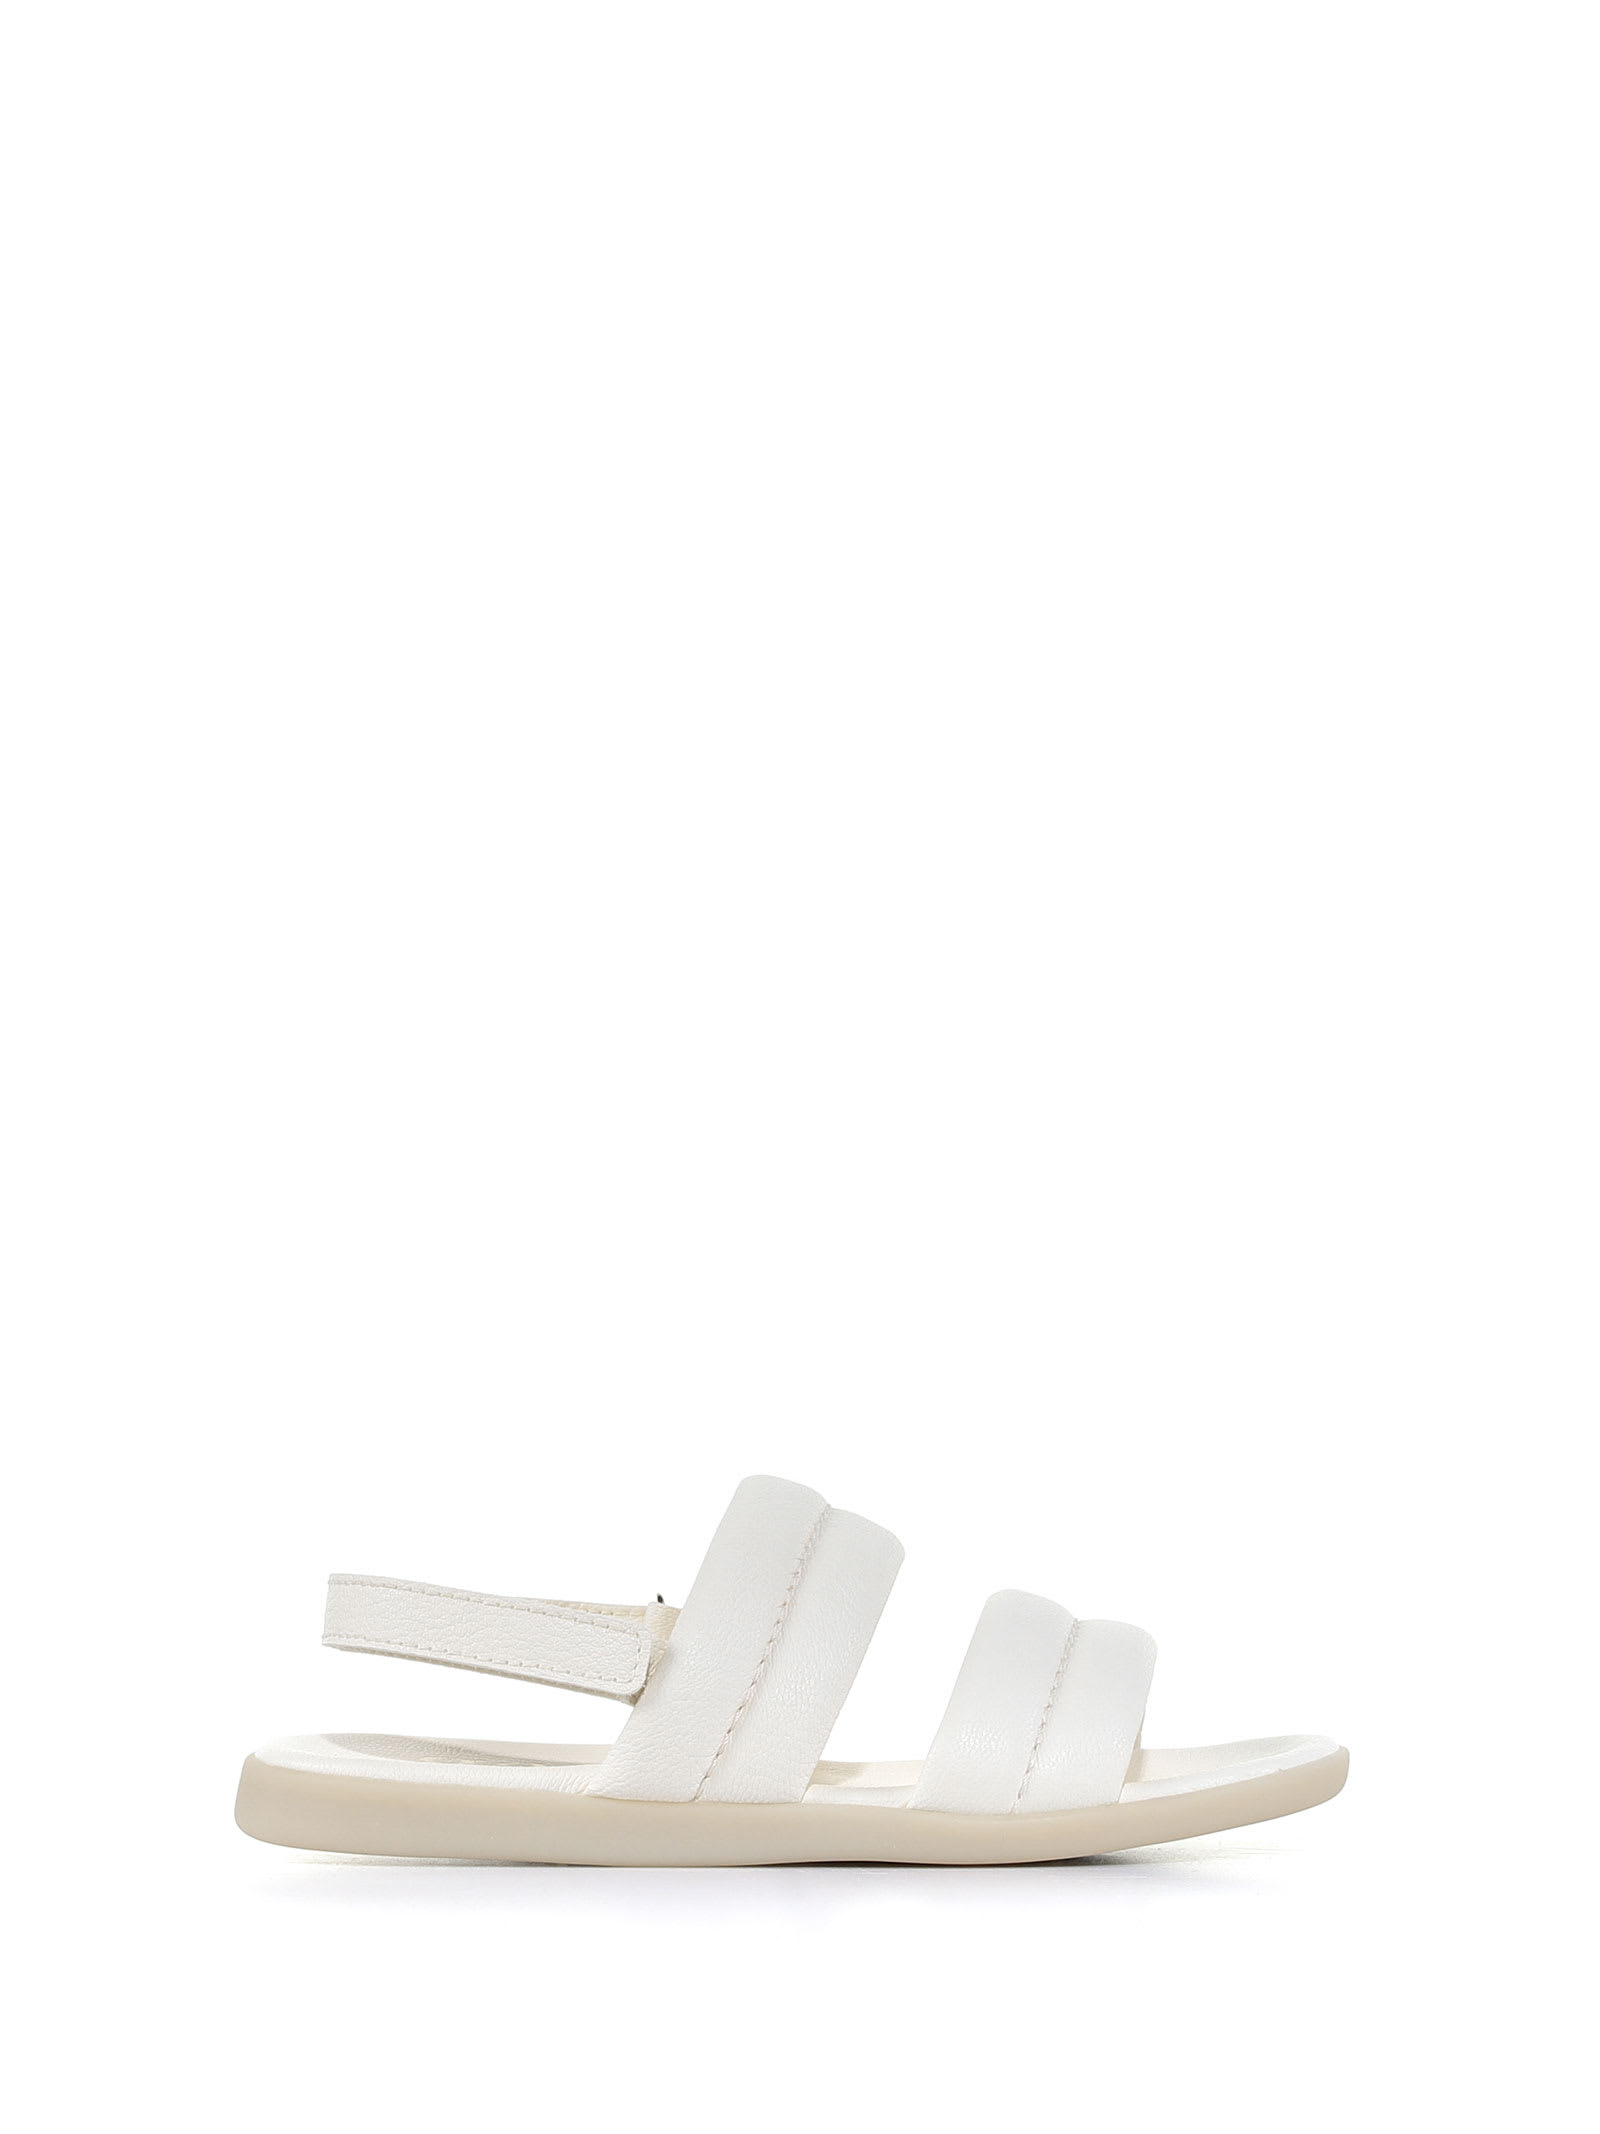 Pedro Garcia Leather Sandal With Bands Detail | Smart Closet